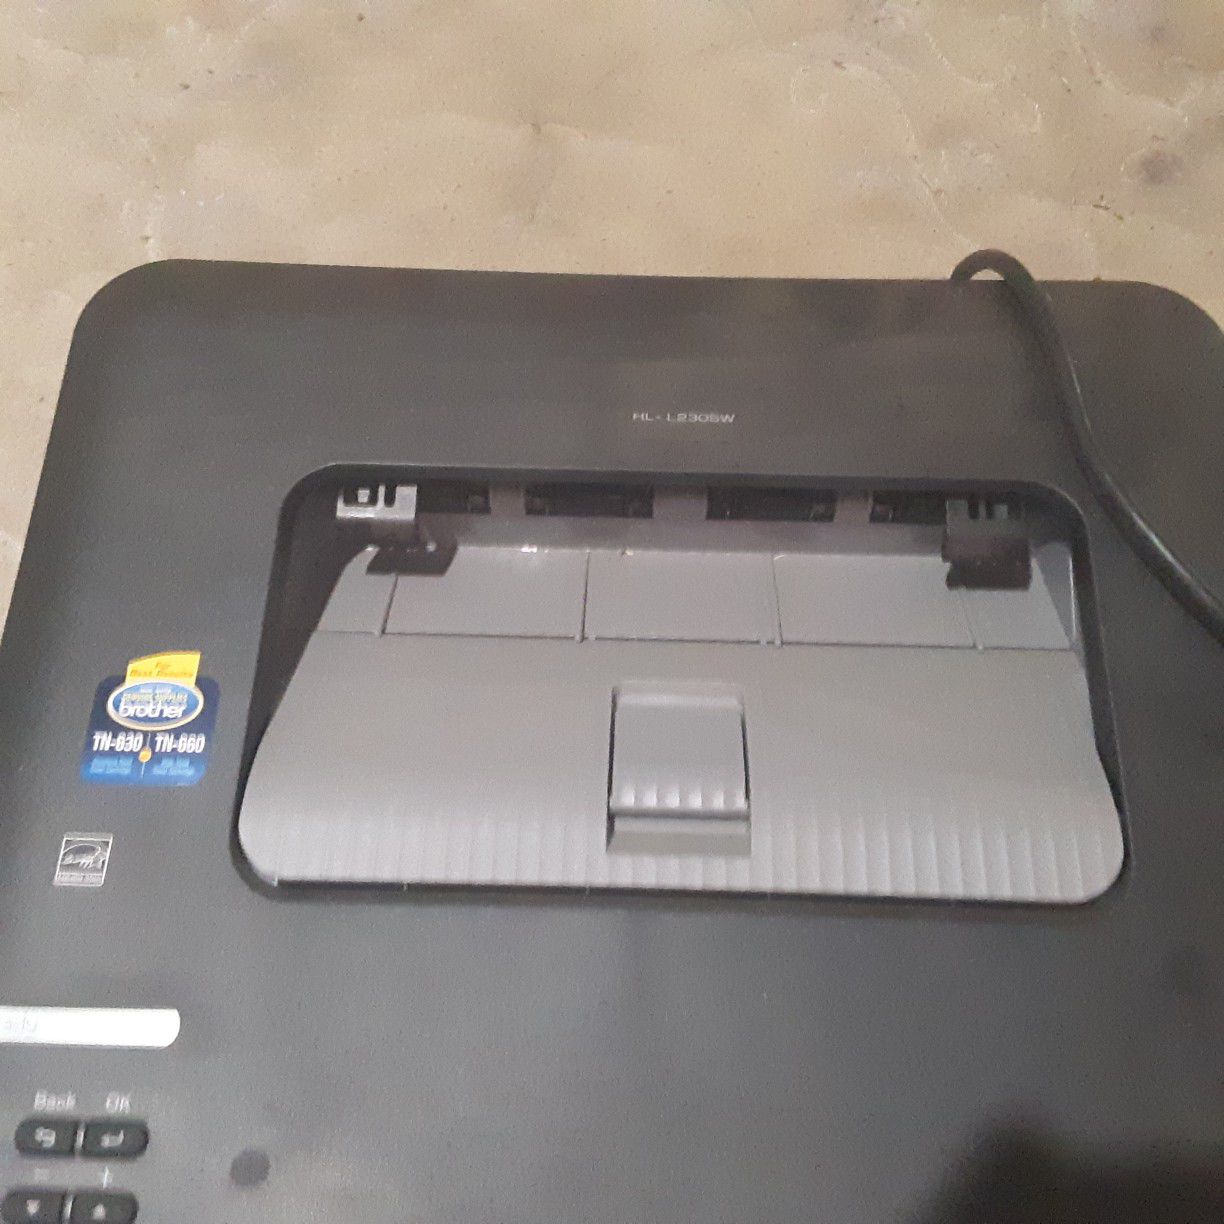 Brother wireless all in one printer